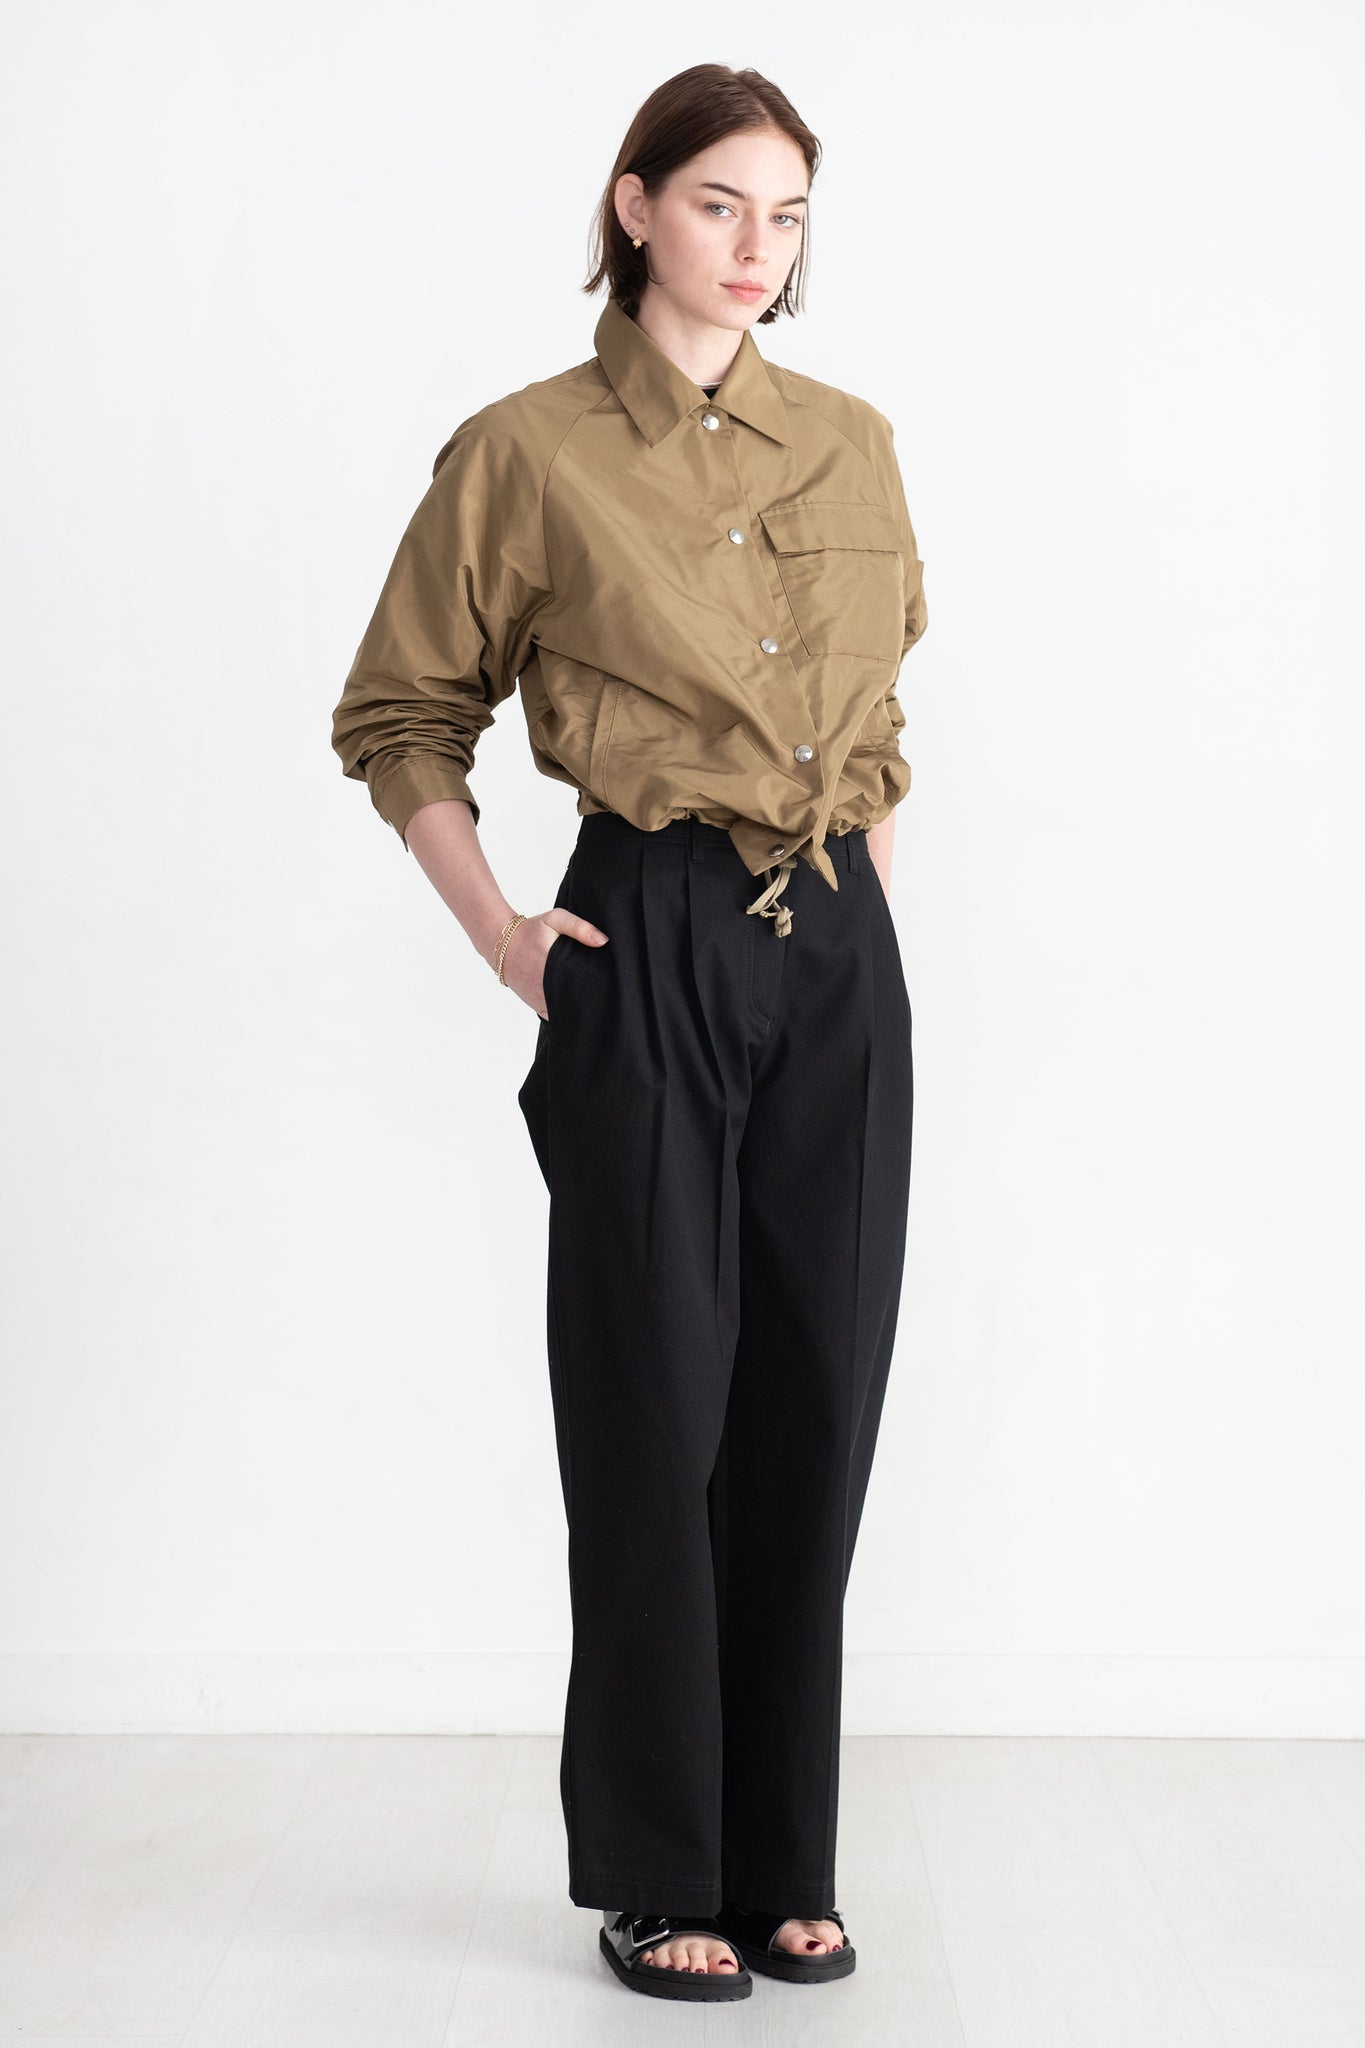 TOTEME - Relaxed Twill Trousers, Black